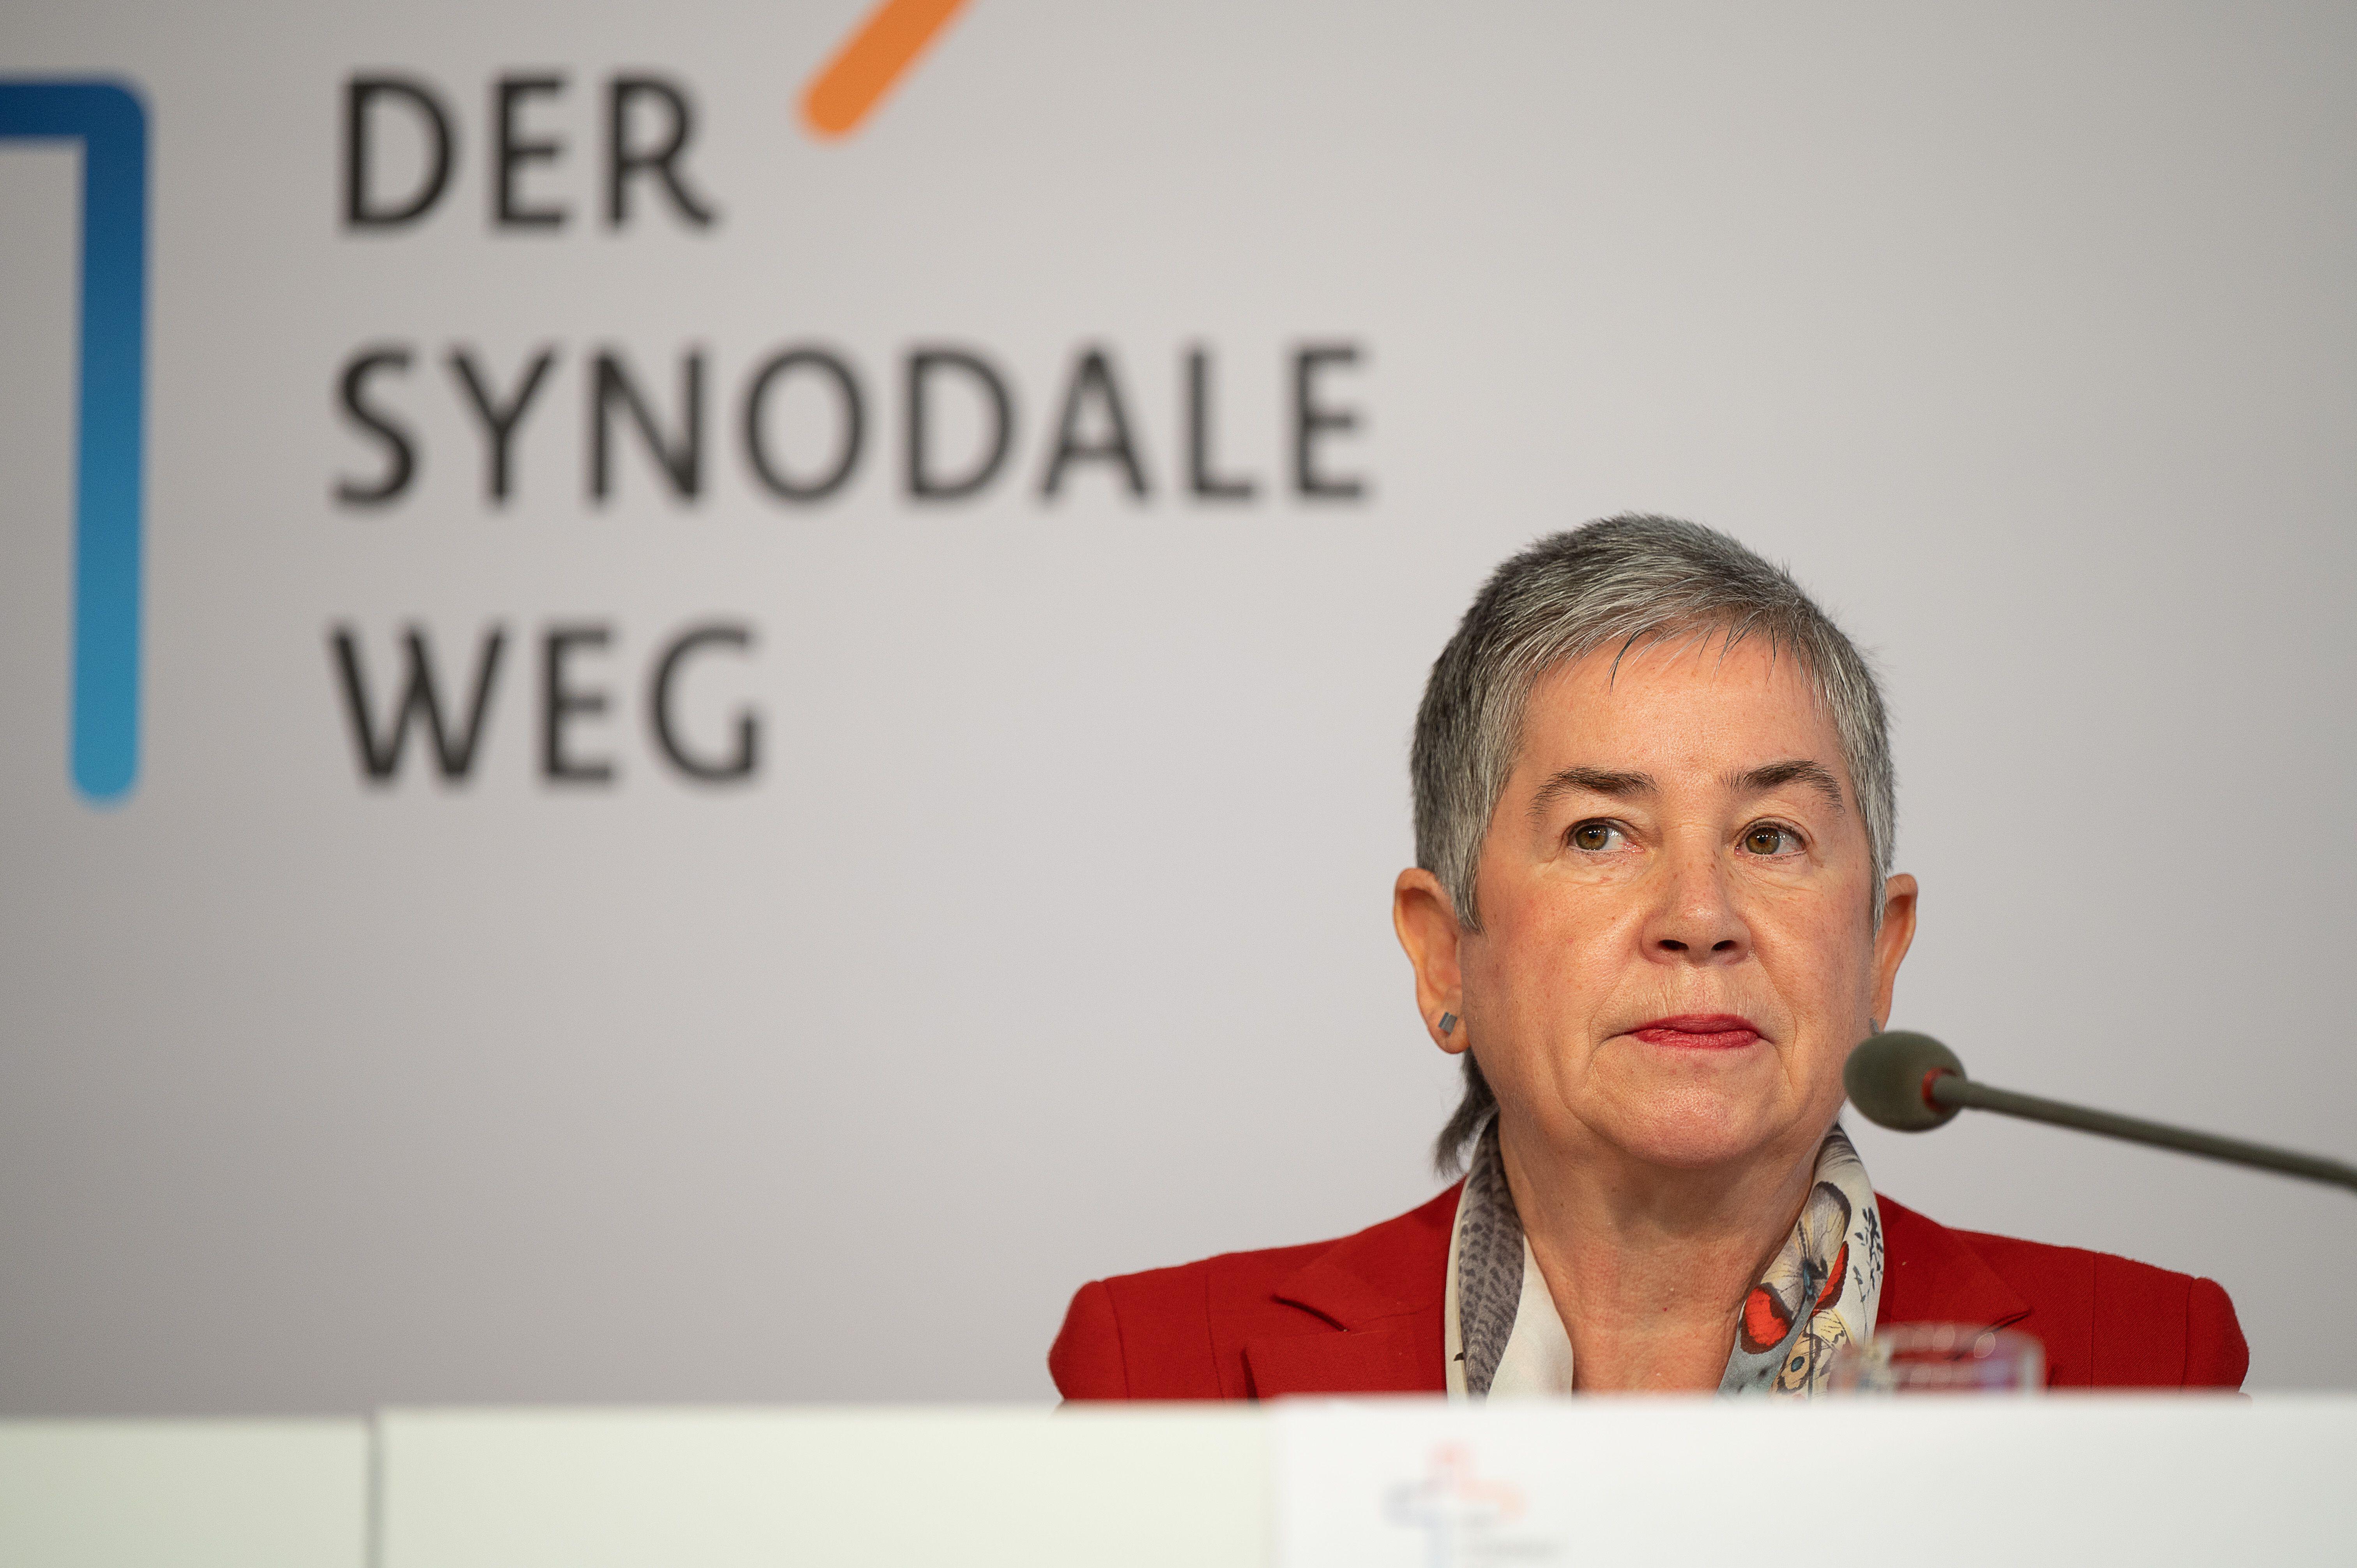 Germany resumes plans for permanent synodal council